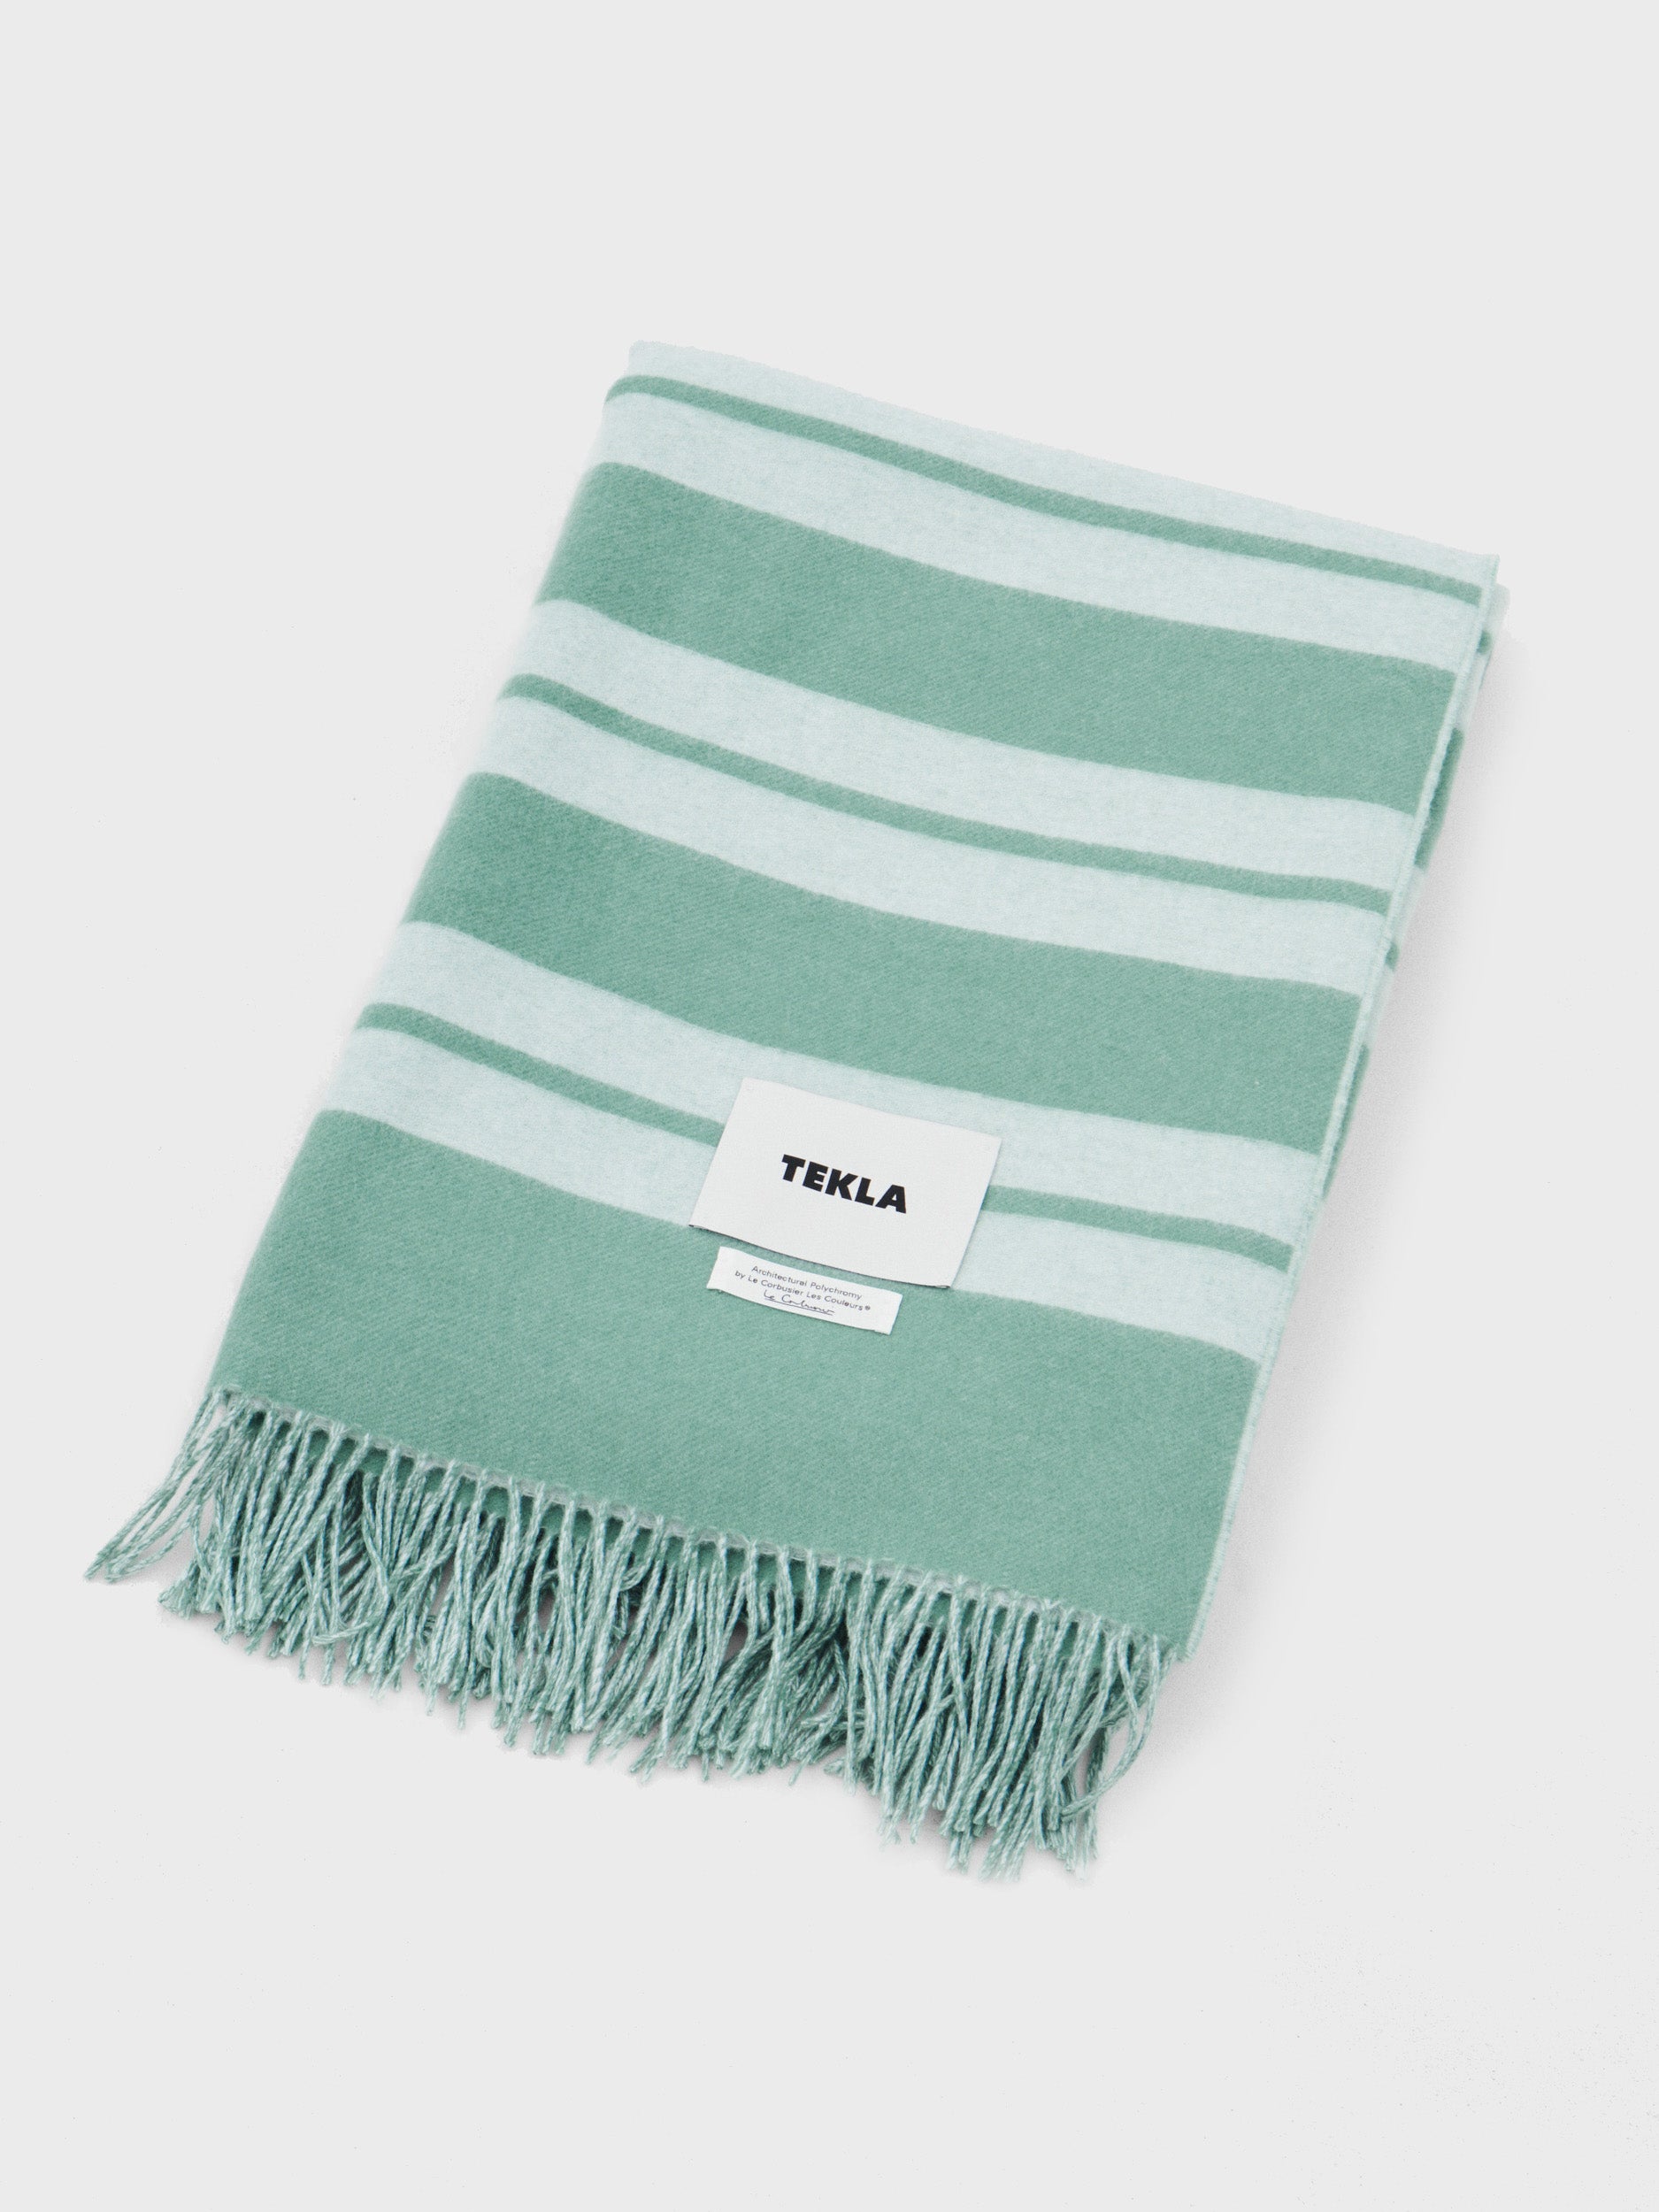 Tekla x Le Corbusier Lambswool Blanket in Outremer Gris and Vert